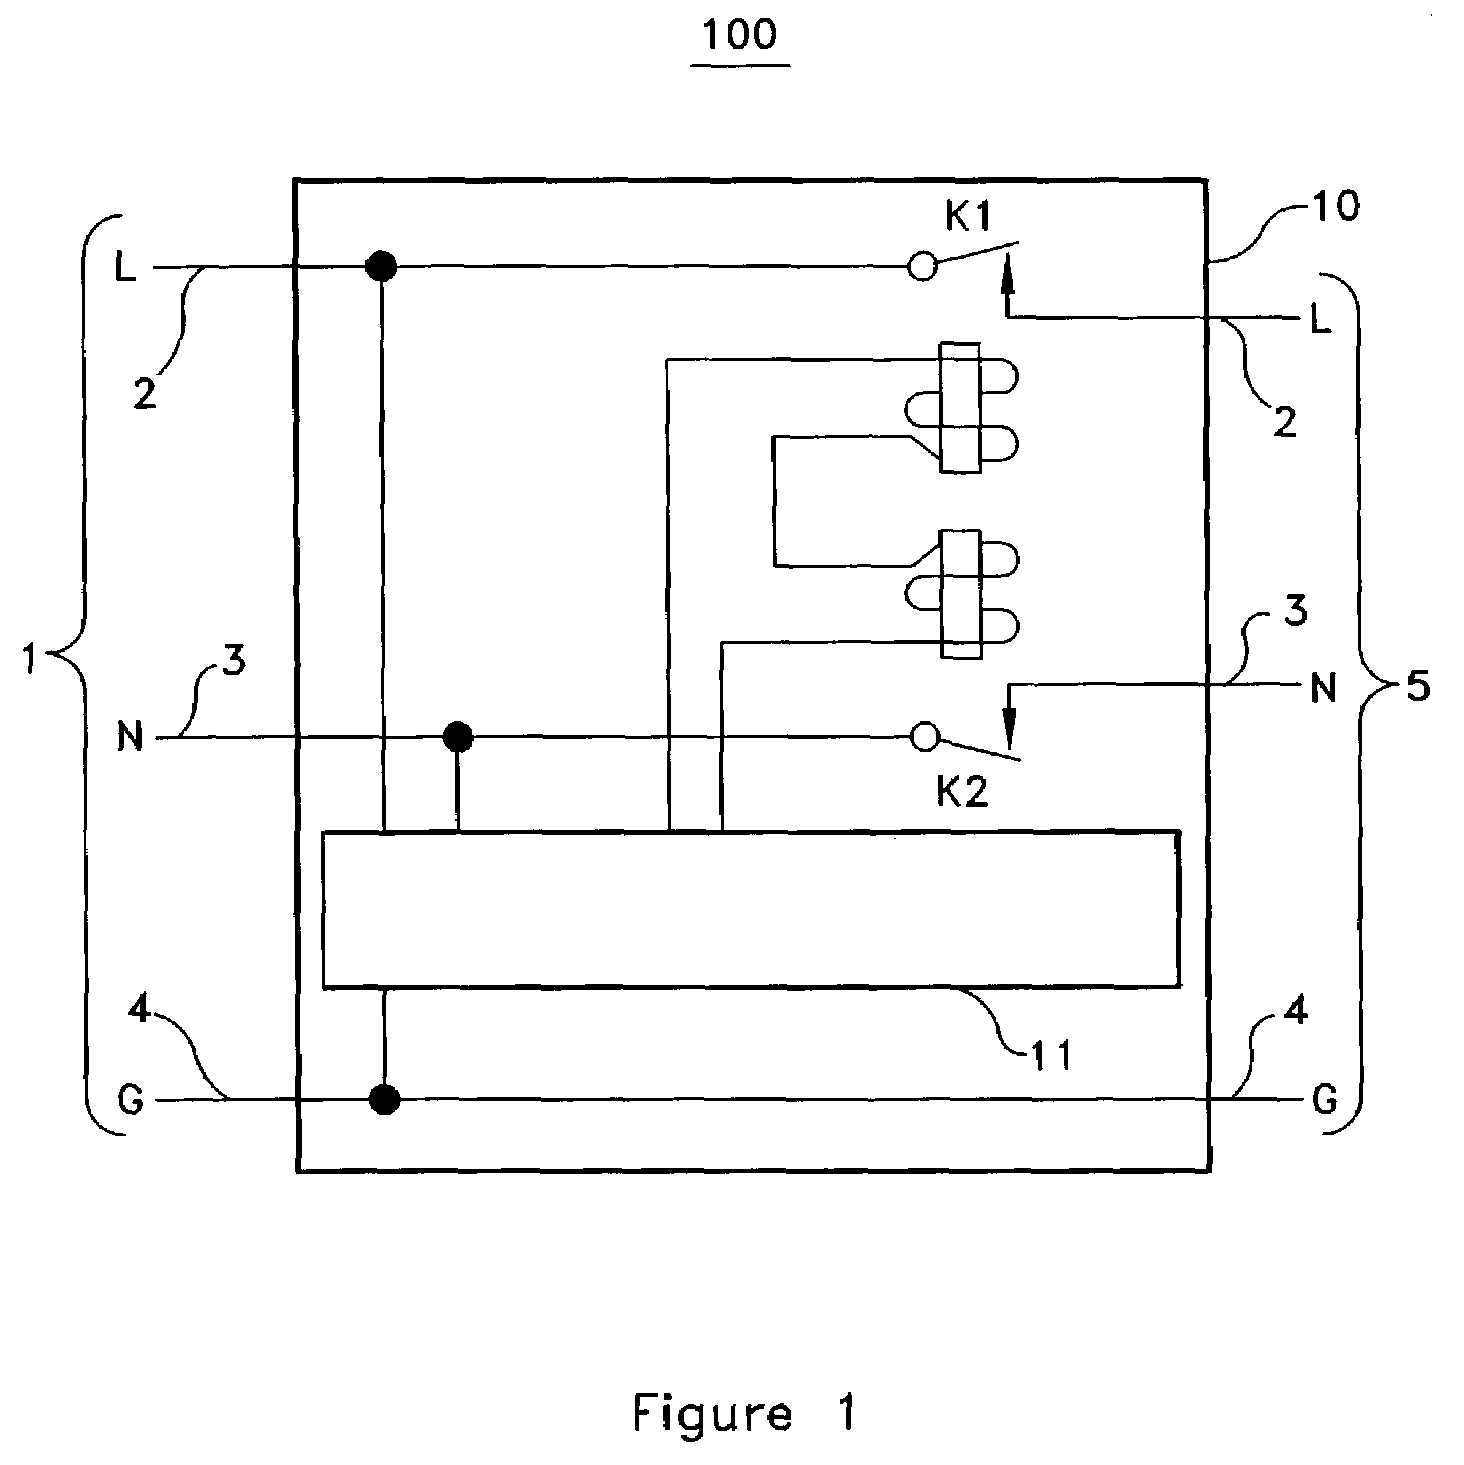 Electrical over/under voltage automatic disconnect apparatus and method